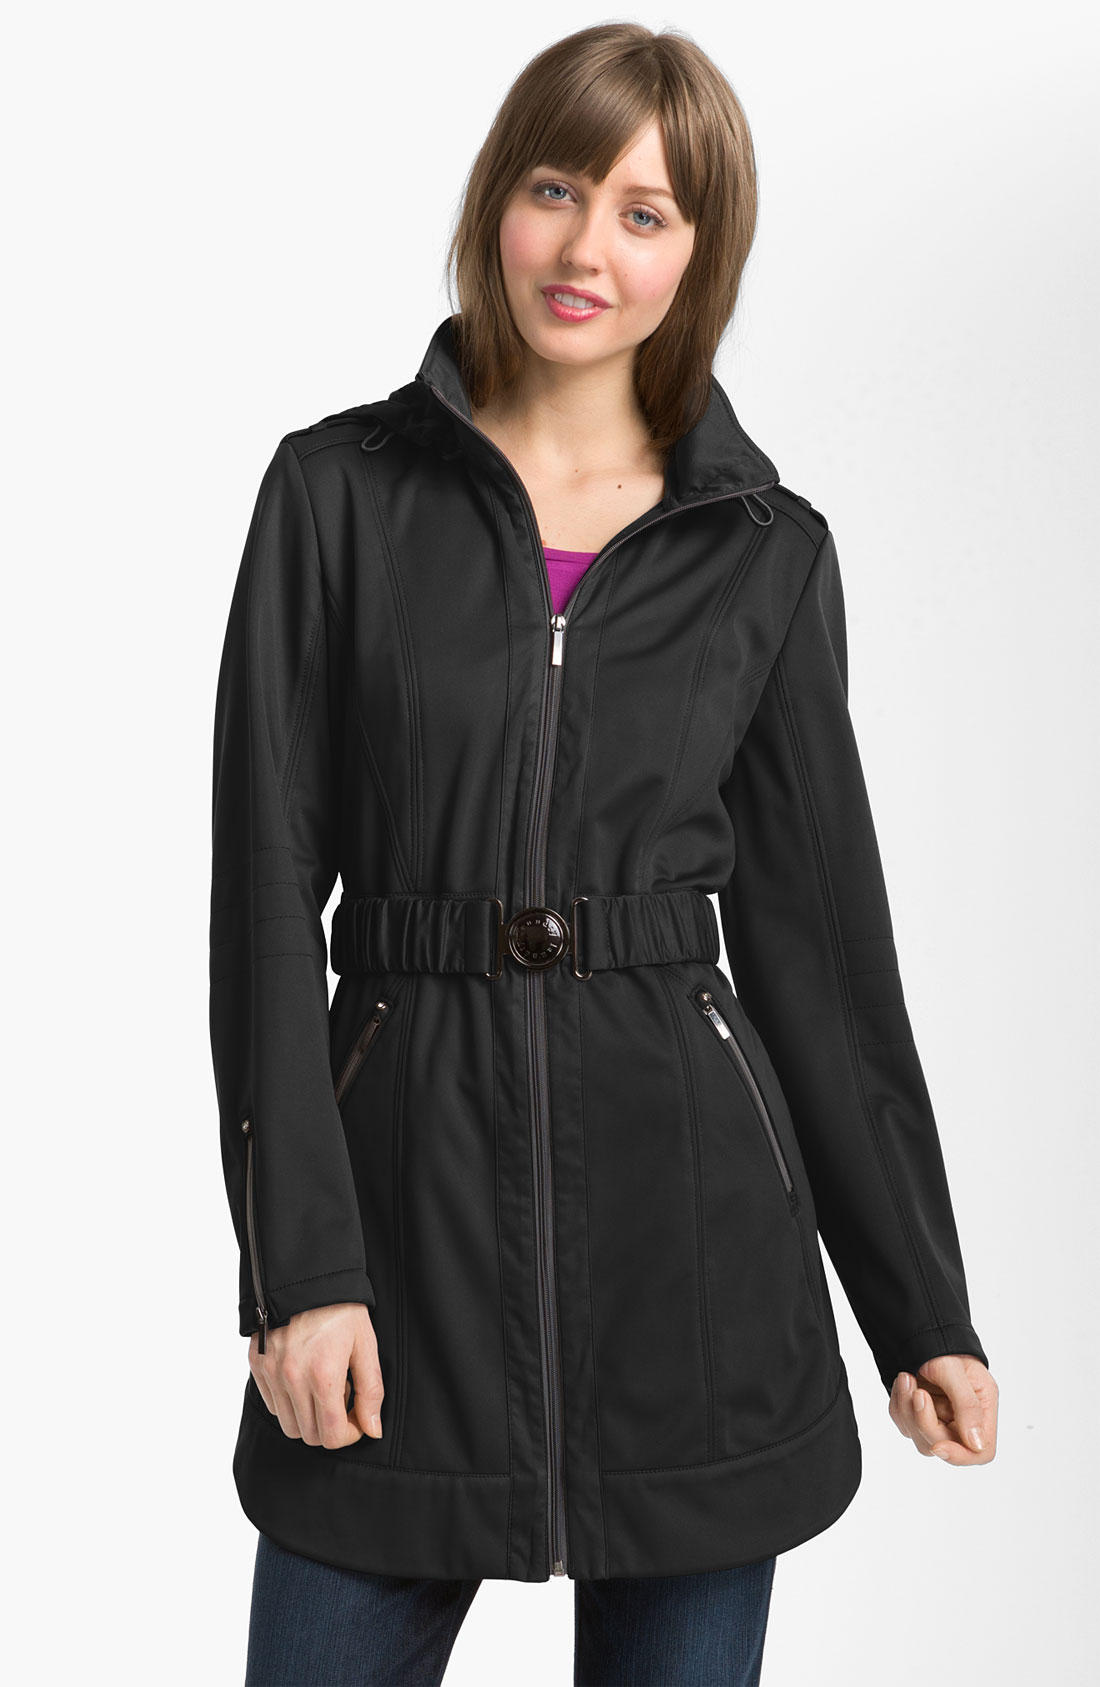 Laundry By Shelli Segal Softshell Jacket with Detachable Hood in Black ...